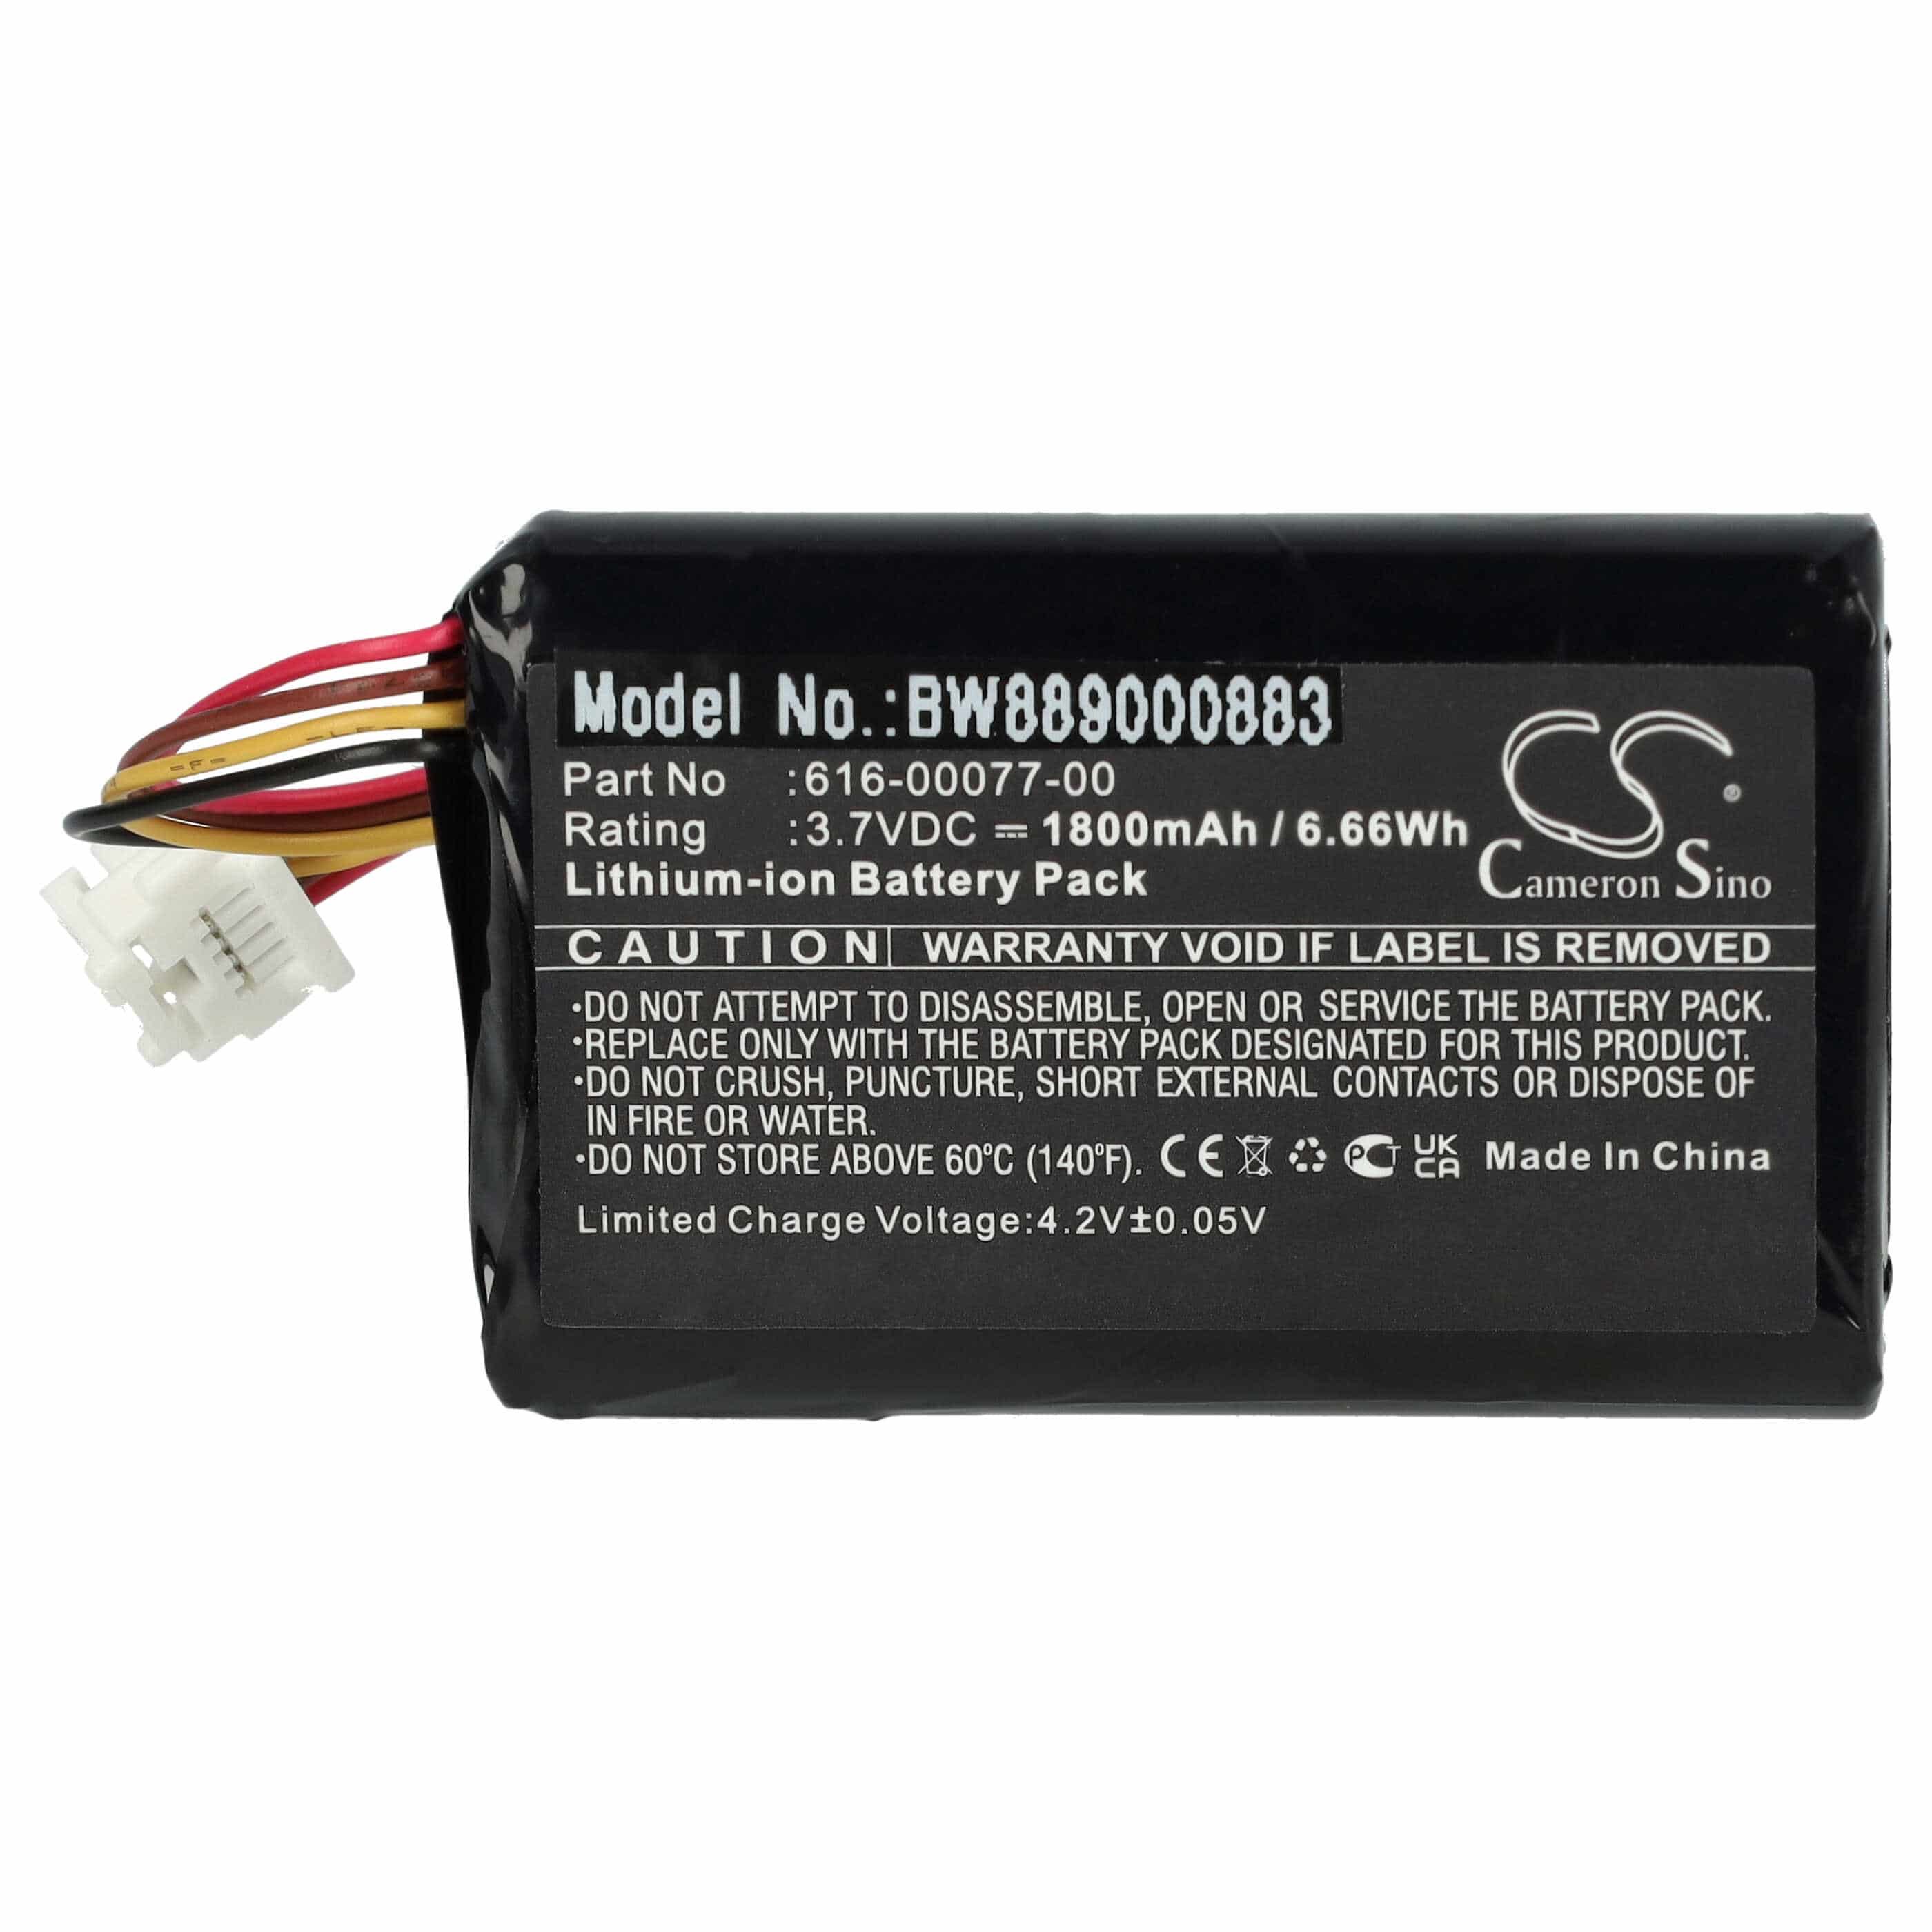 GPS Battery Replacement for Garmin 010-12110-003, 361-00077-10, 361-00077-00, 010-12110-03 - 1800mAh, 3.7V